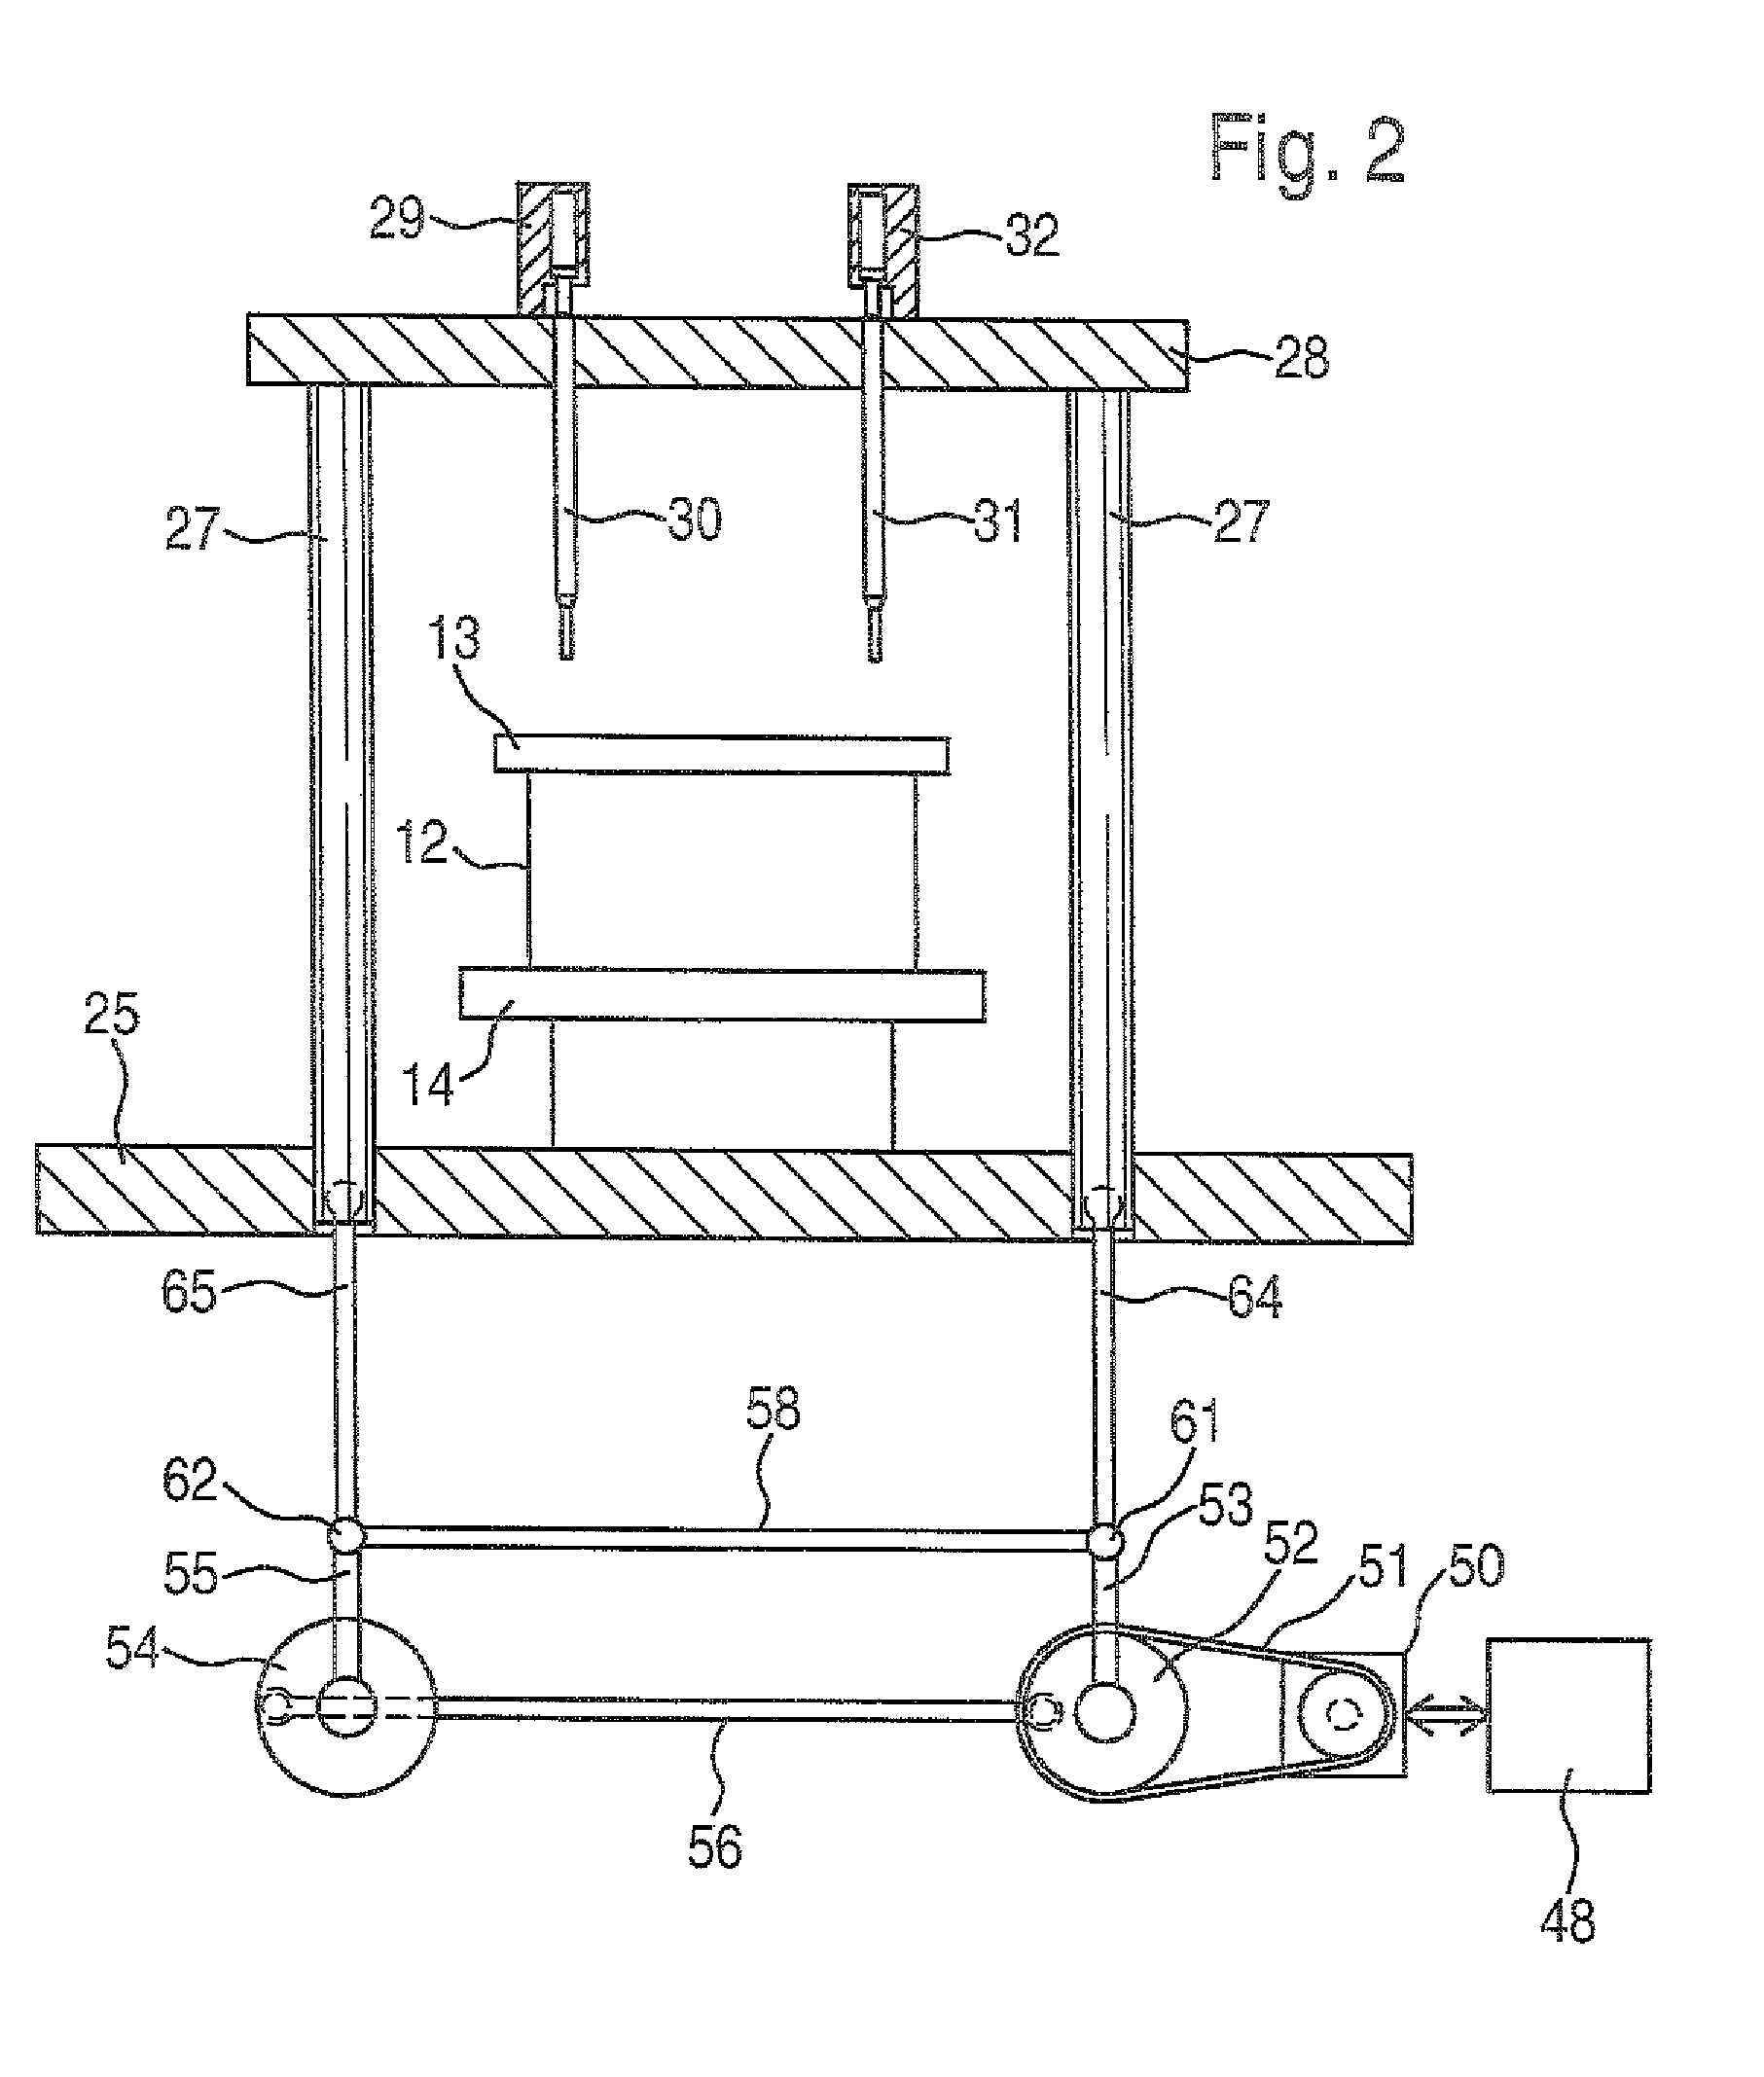 Device for filling at least one dosing chamber